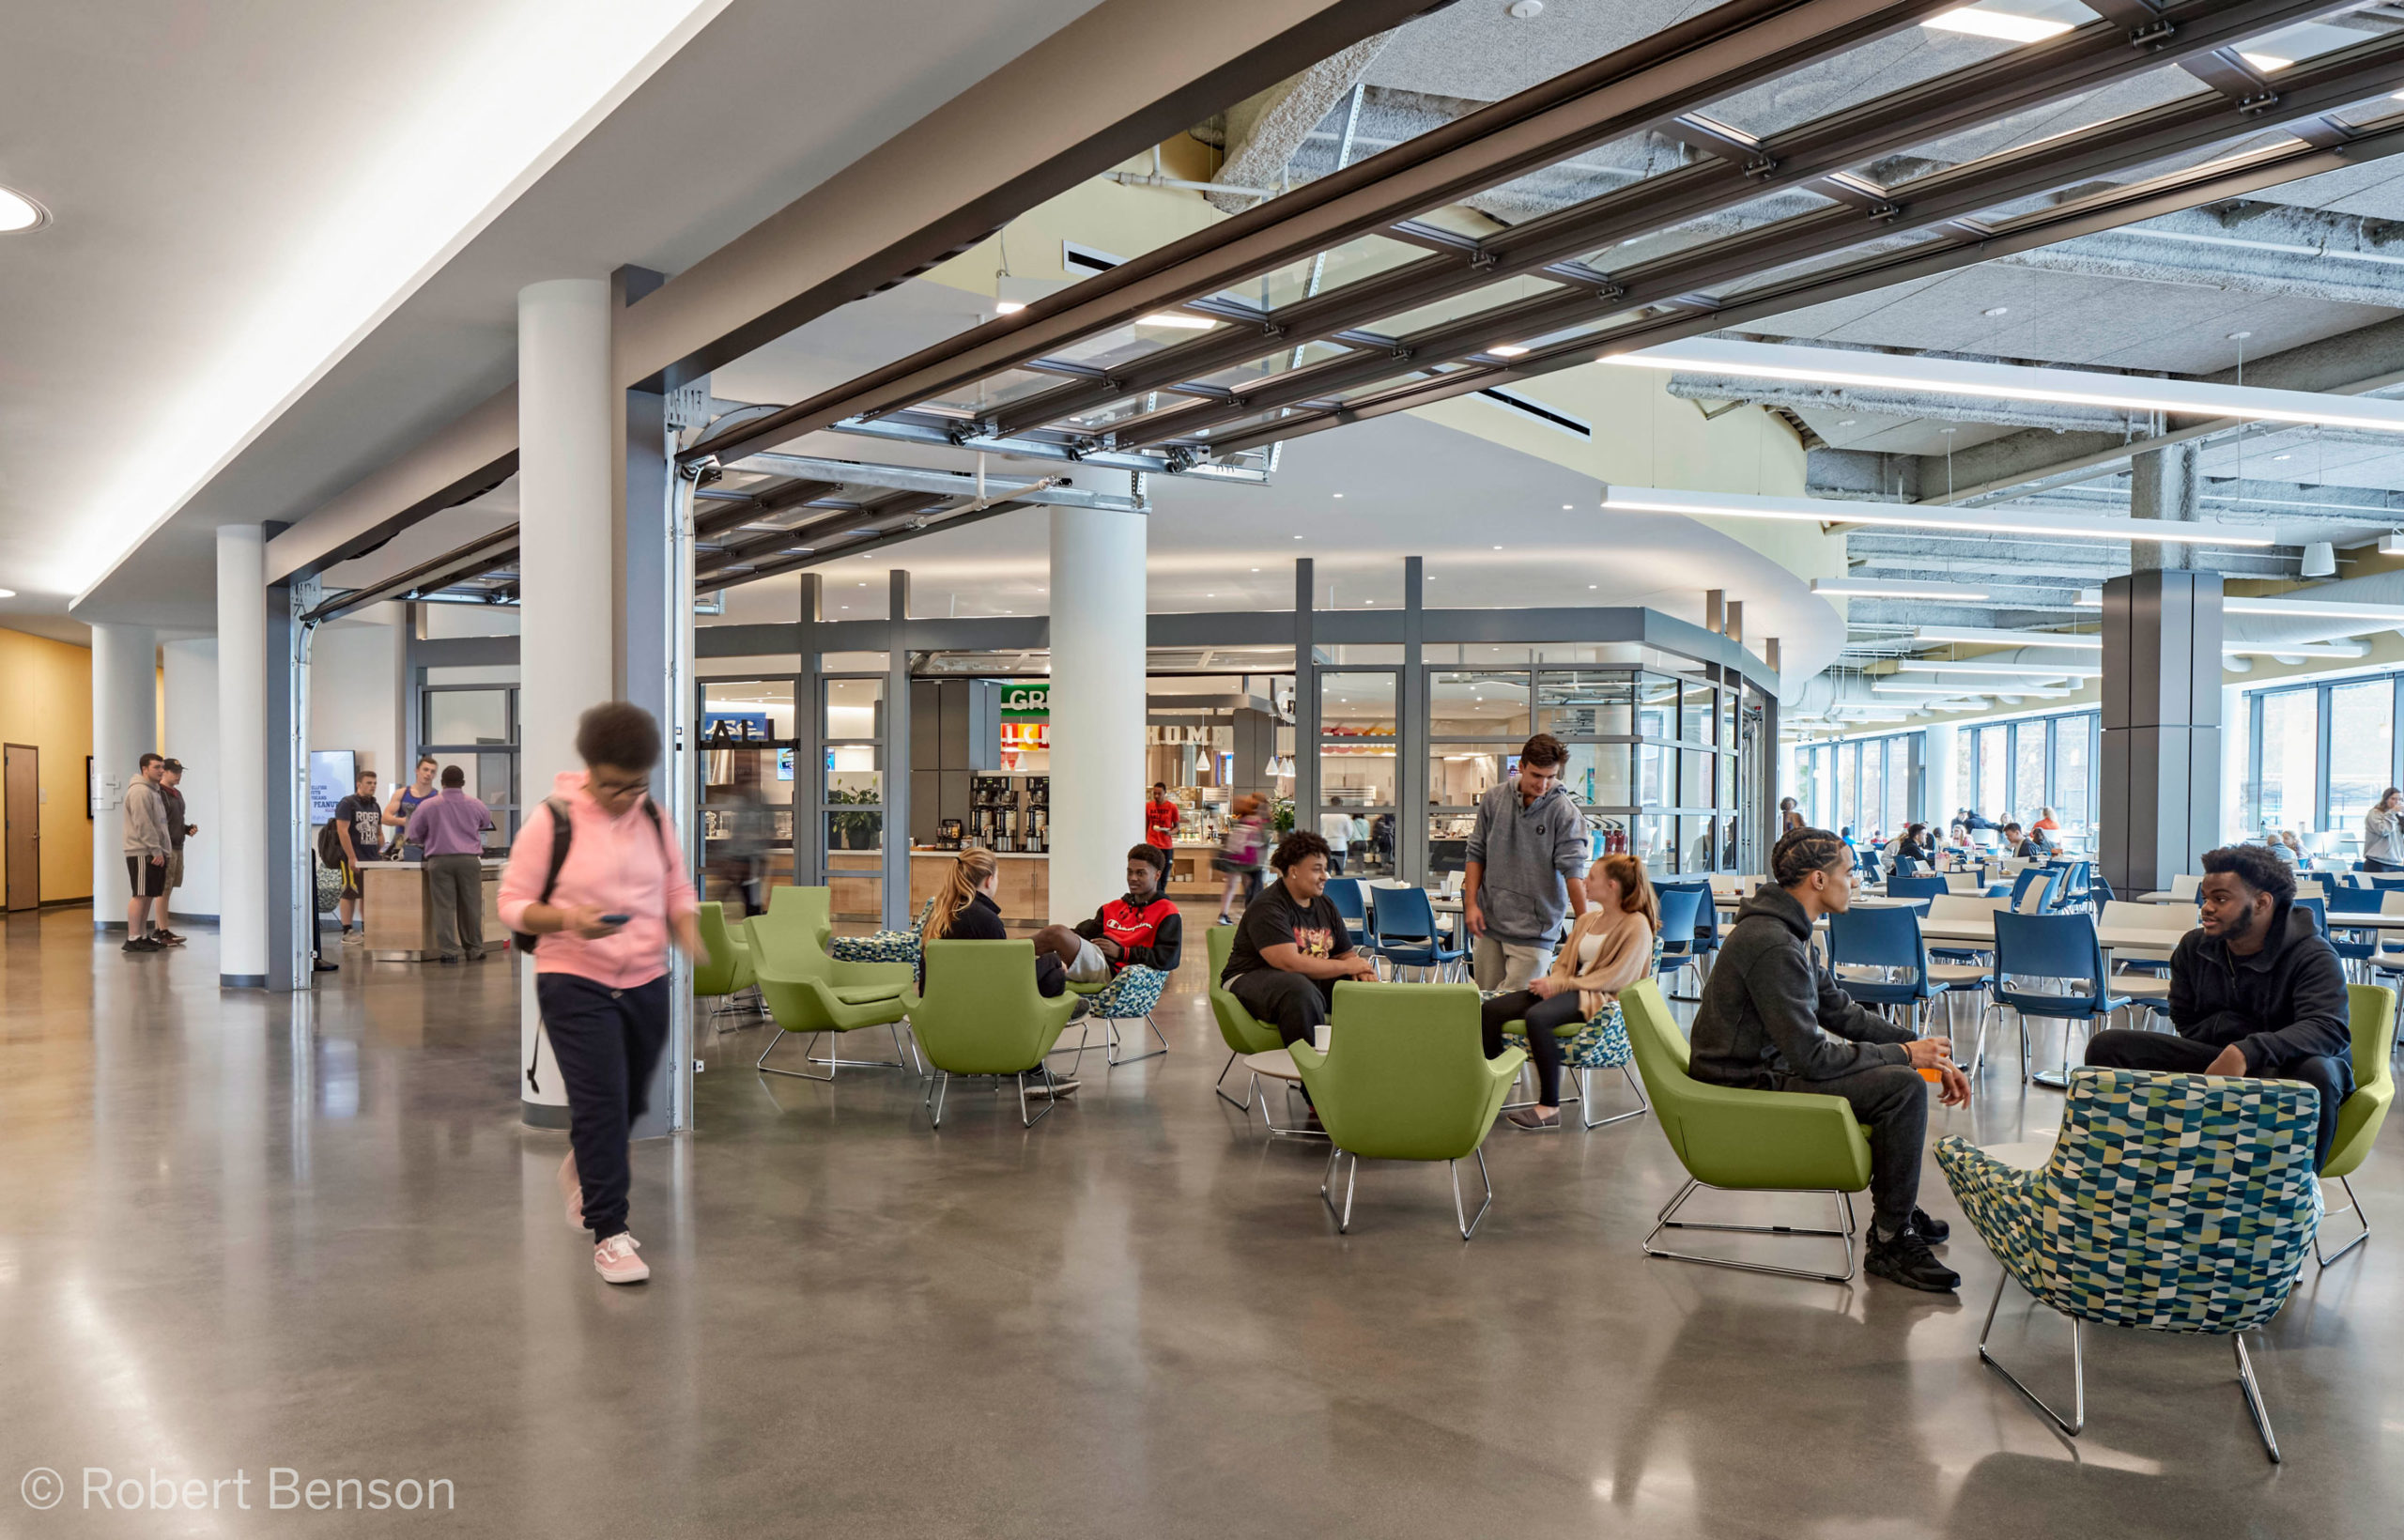 Dining hall and gathering spaces at UMass Boston